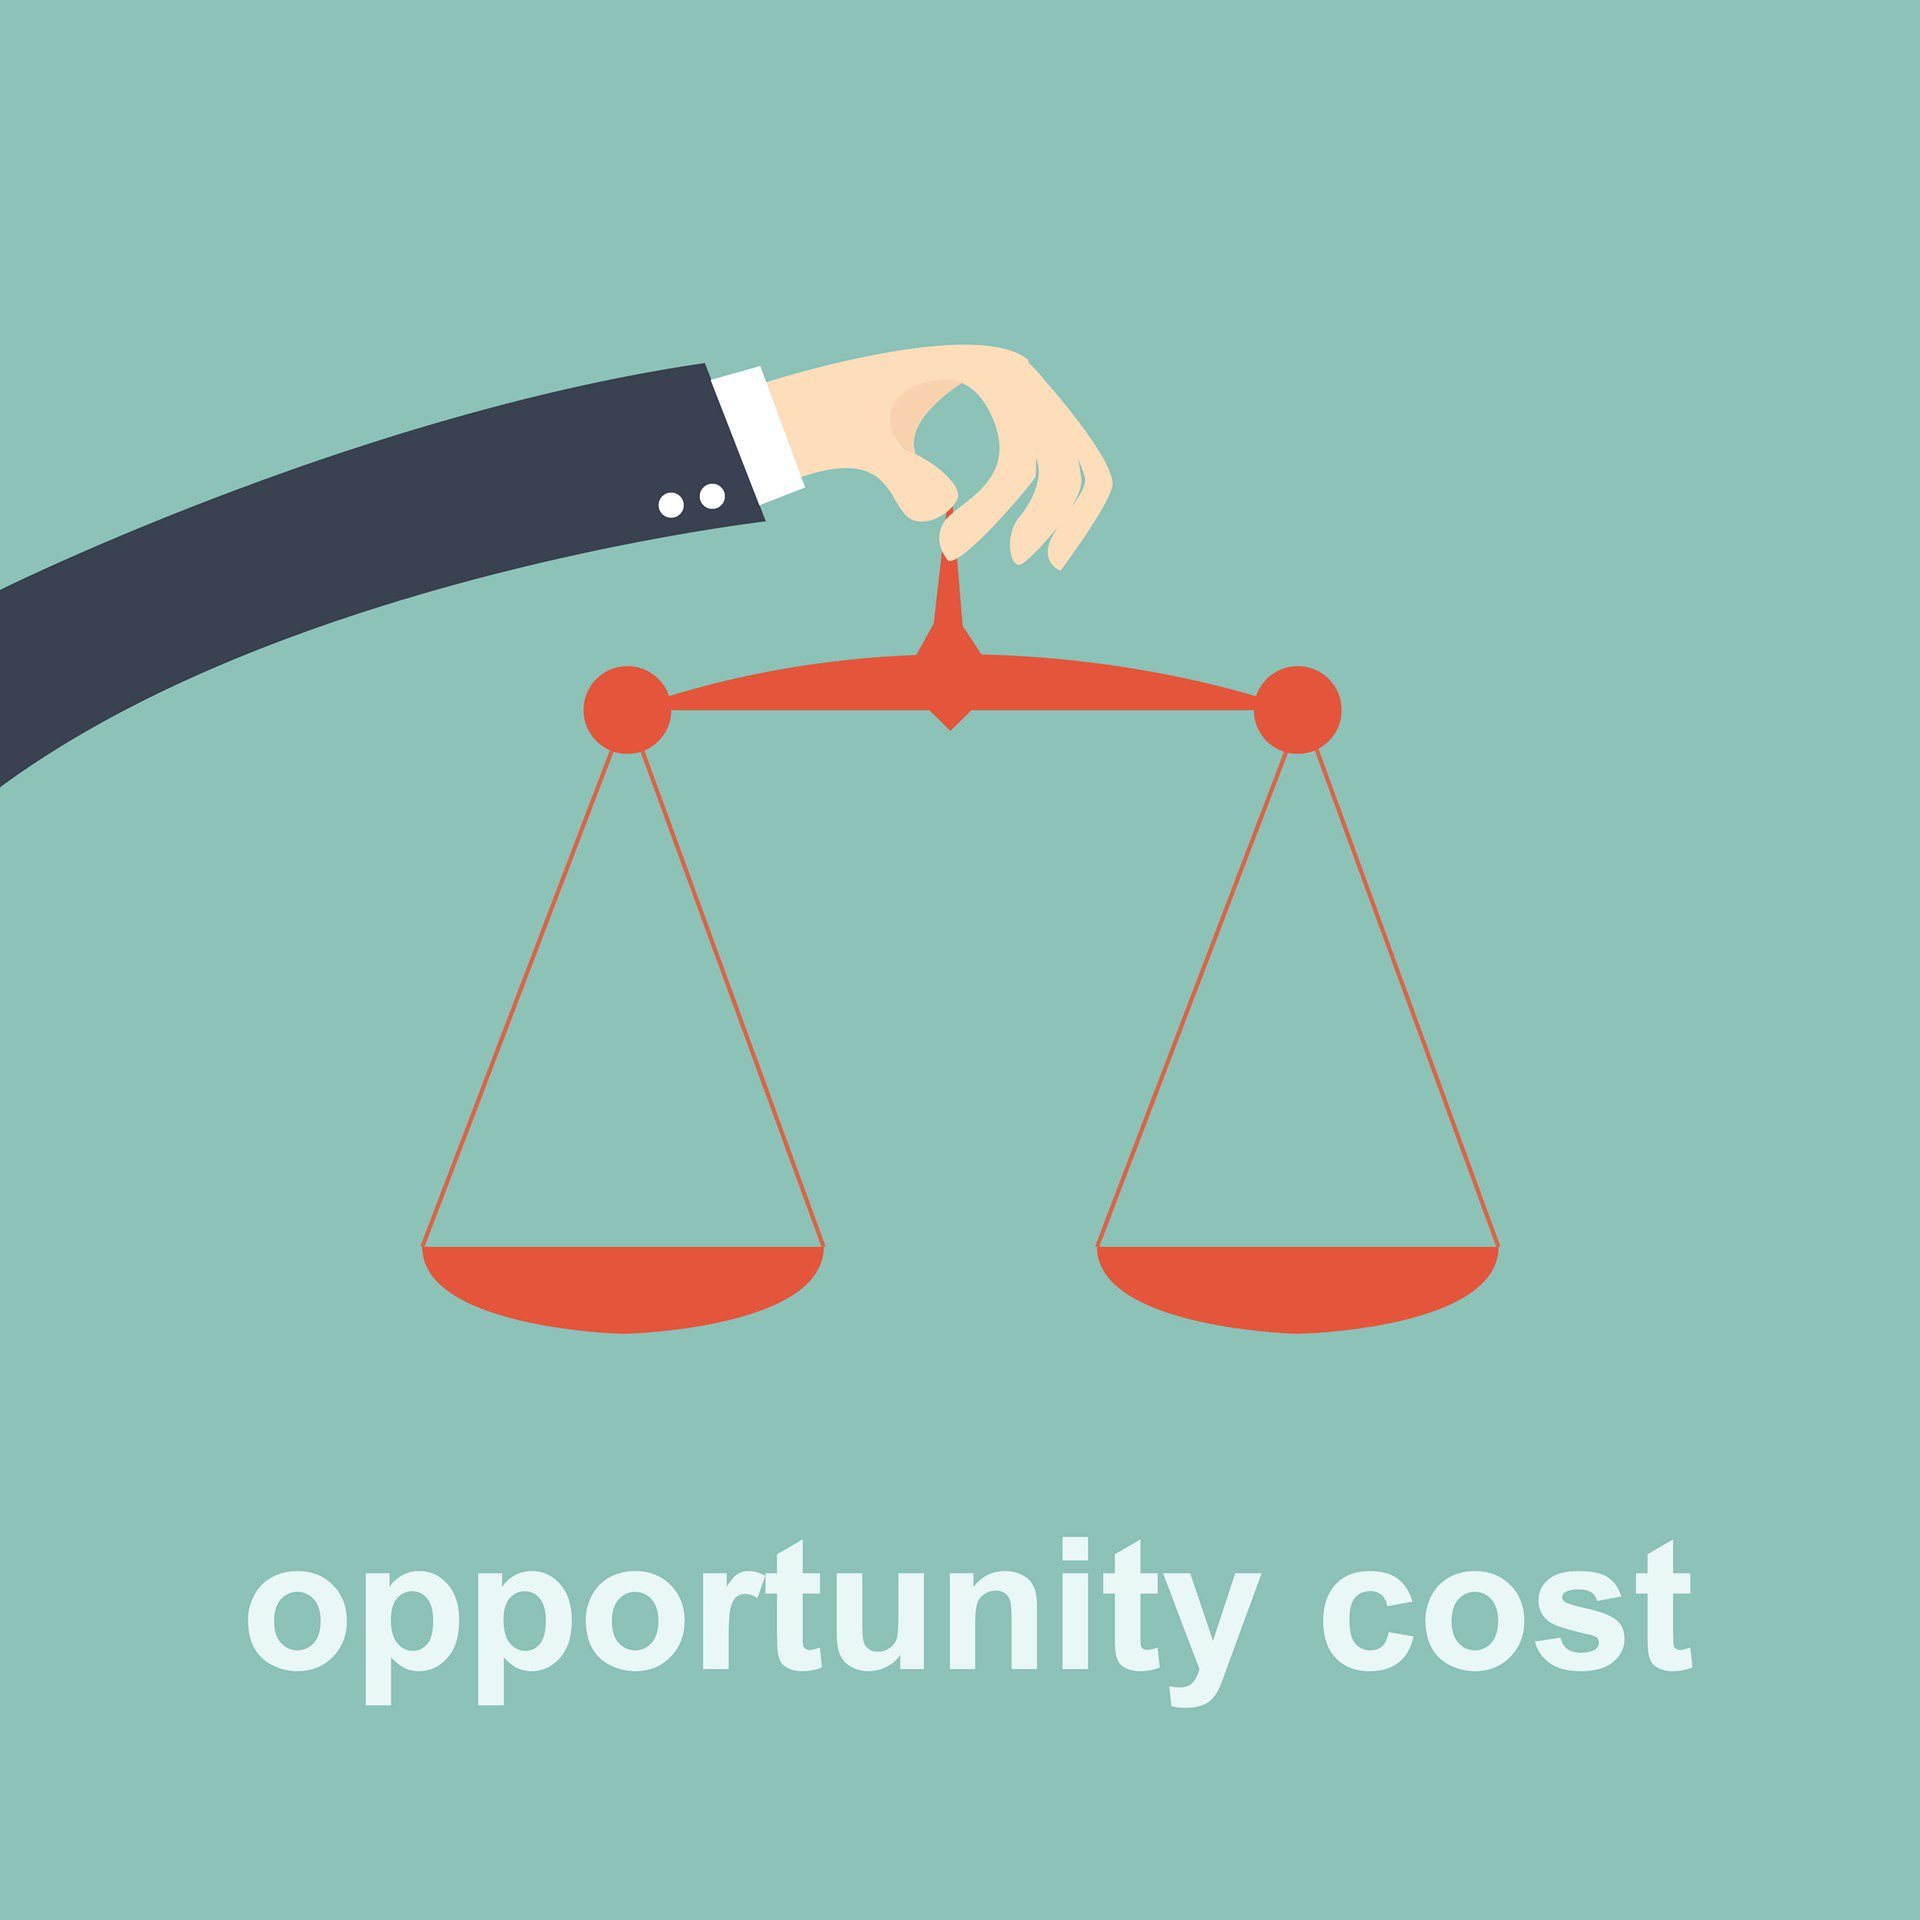 what is the link between scarcity choice and opportunity cost